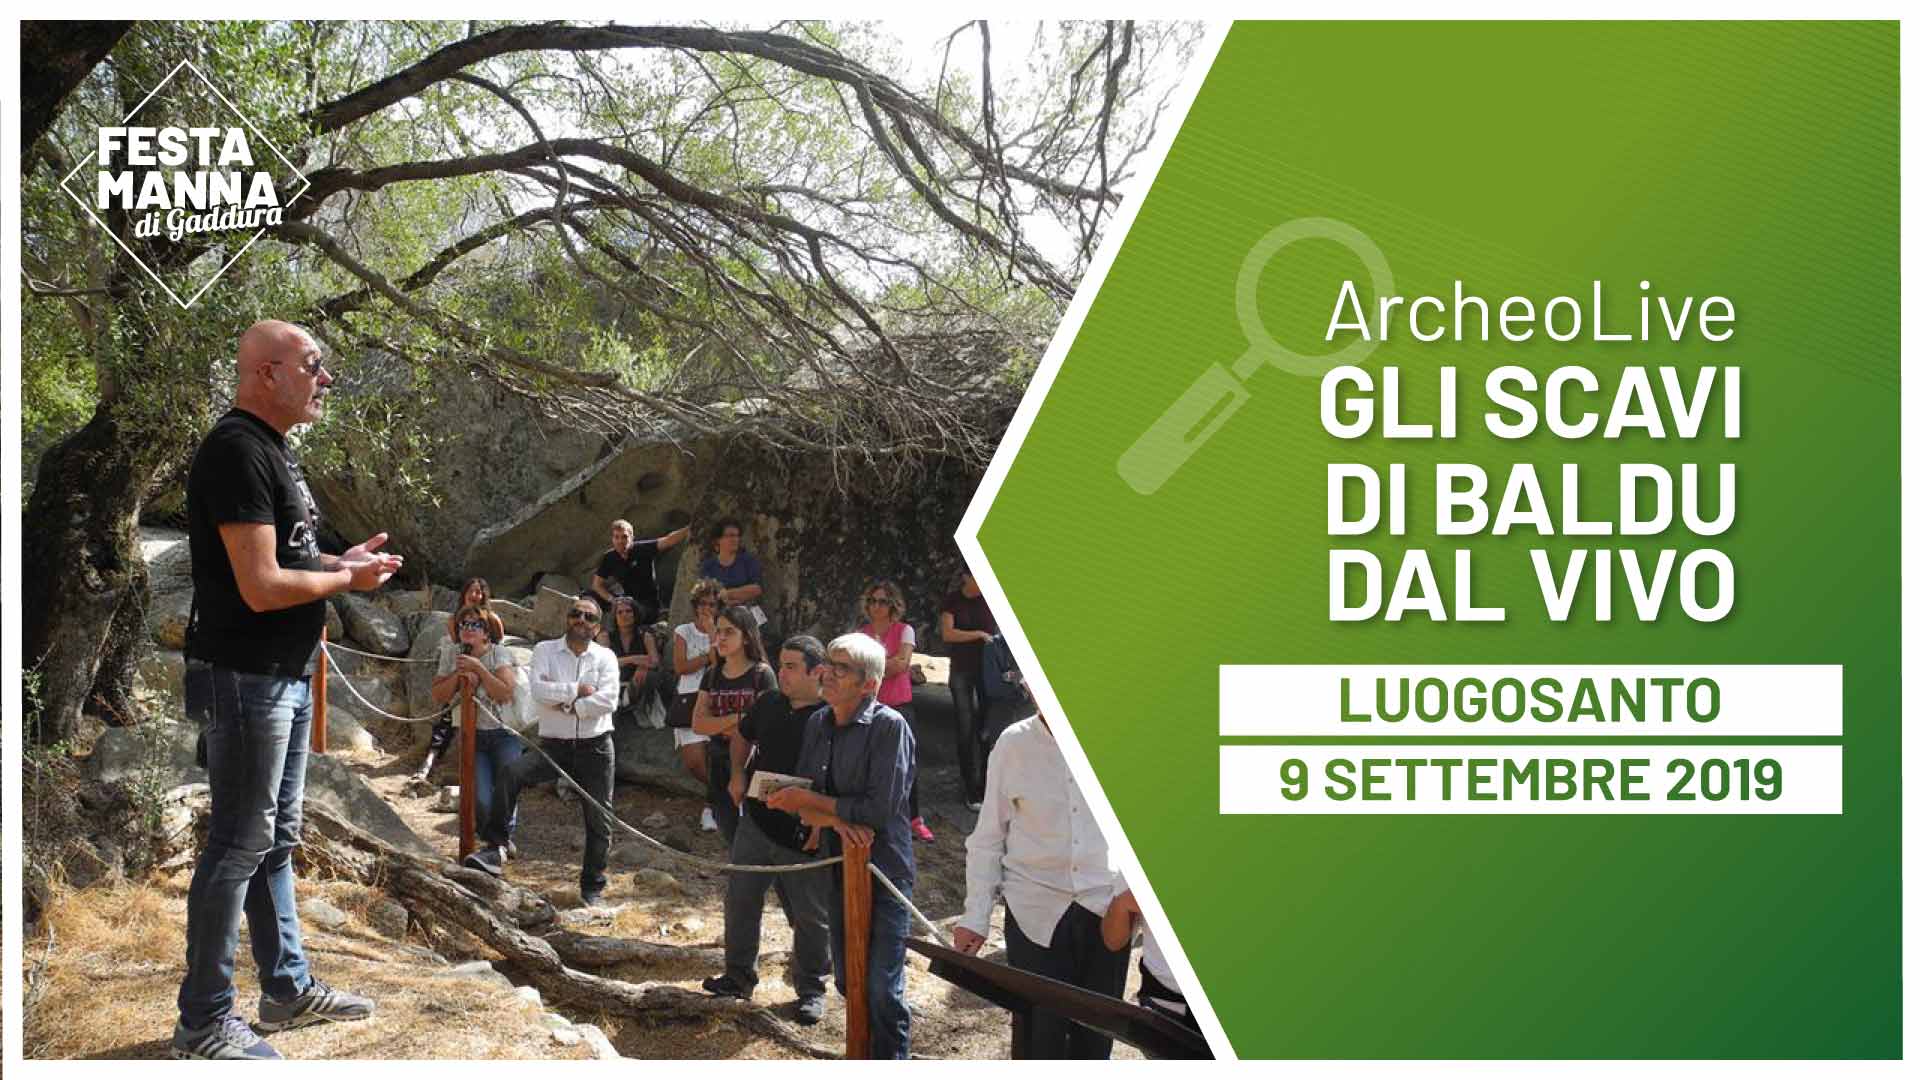 ArcheoLive. Guided visit to the archaeological excavation of the Baldu Palace | Festa Manna di Gaddura 2019